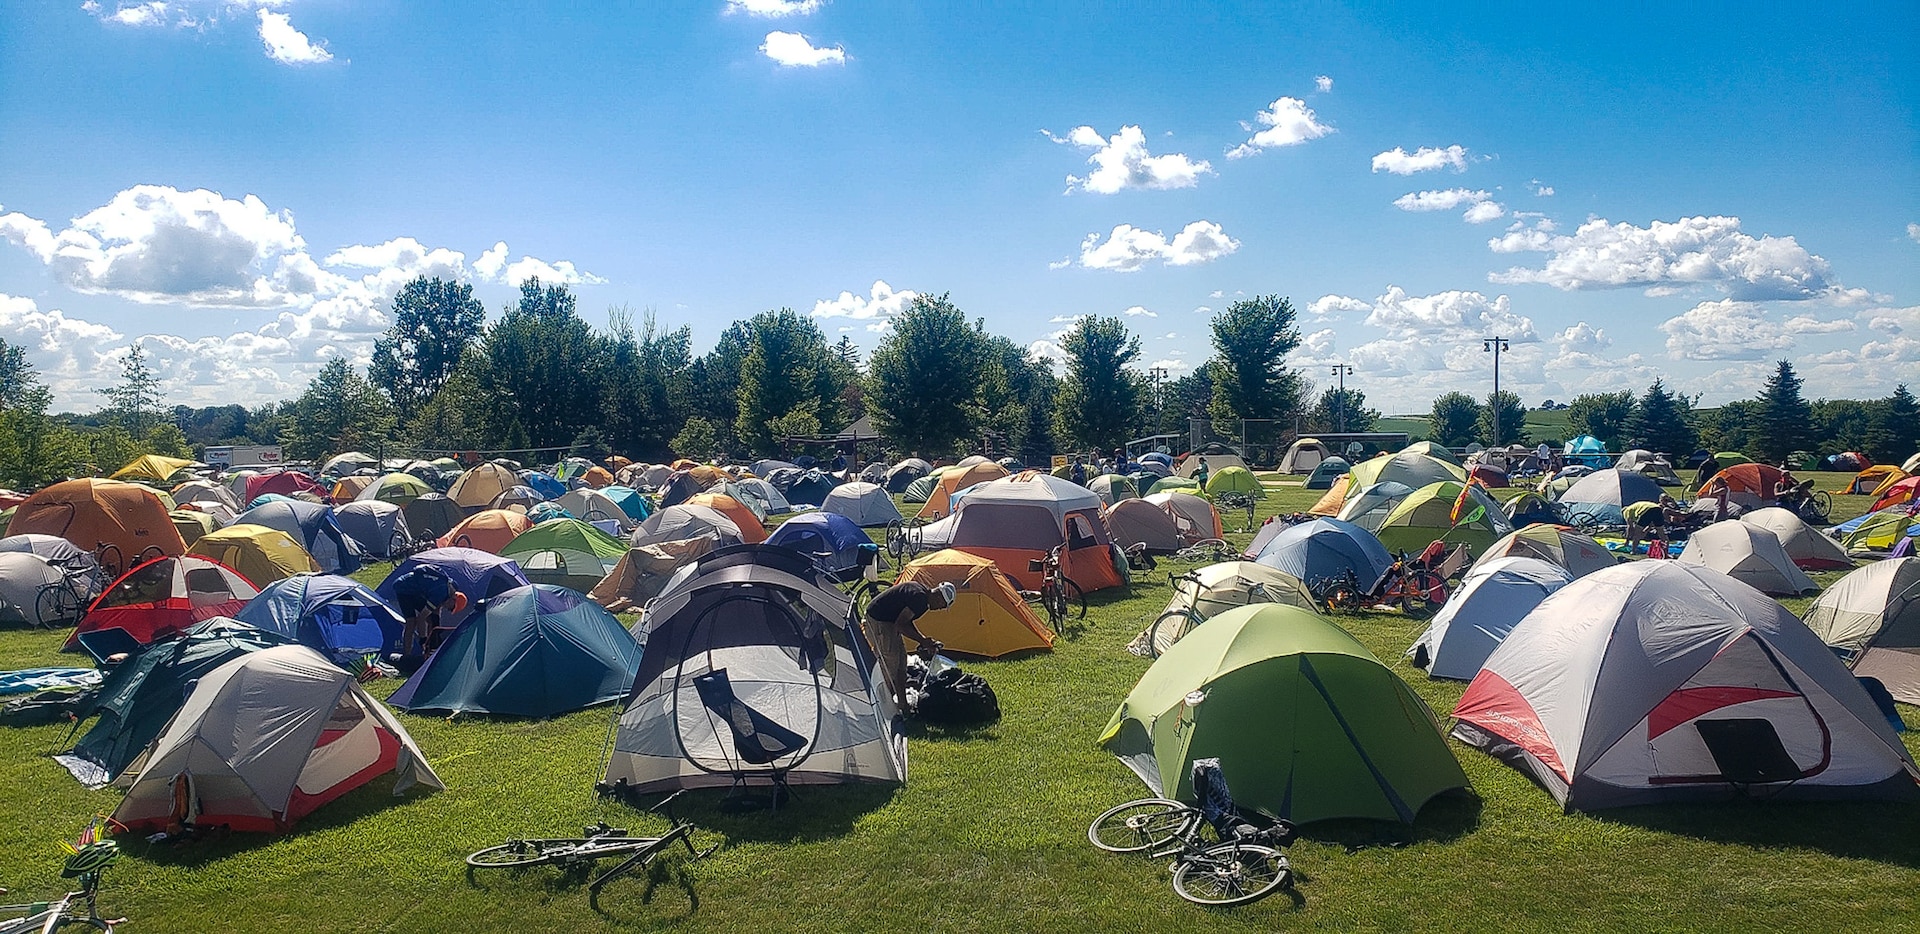 picture of 150 tents set up at a campsite